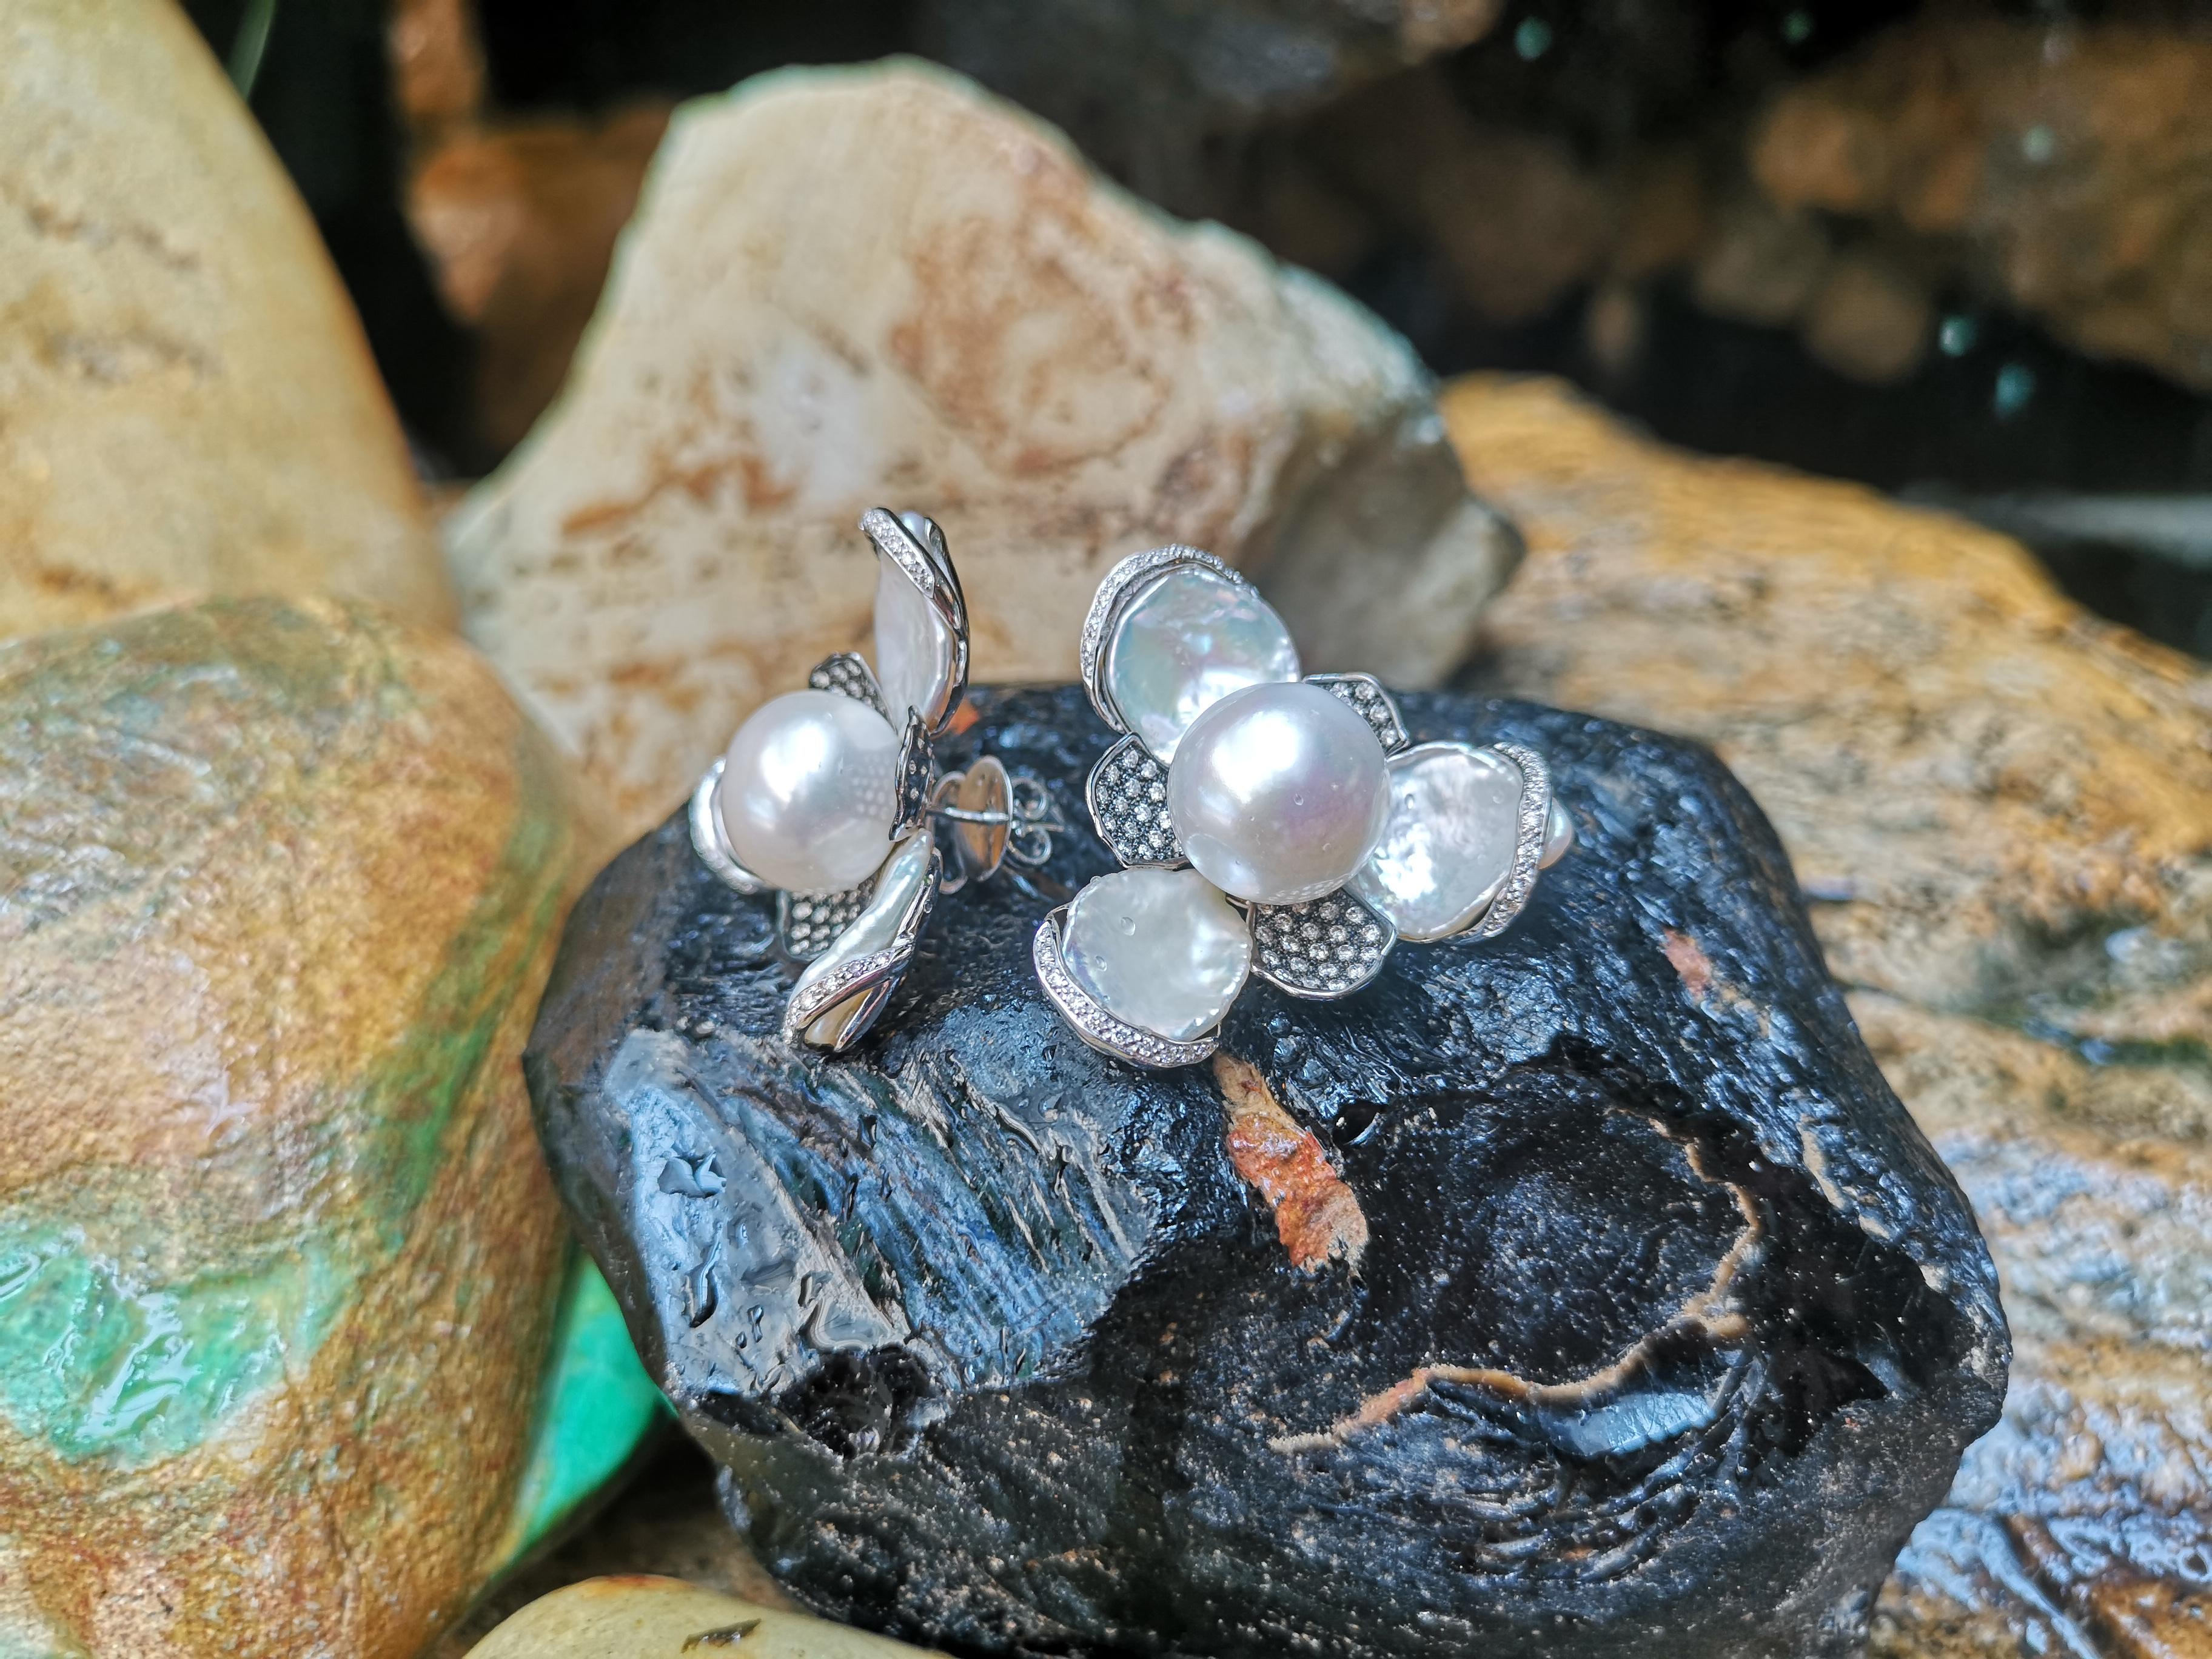 Fresh Water Pearl with Brown Diamond 1.57 carats Earring set in 18 Karat White Gold Settings

Width: 3.8 cm
Length: 3.6 cm 

